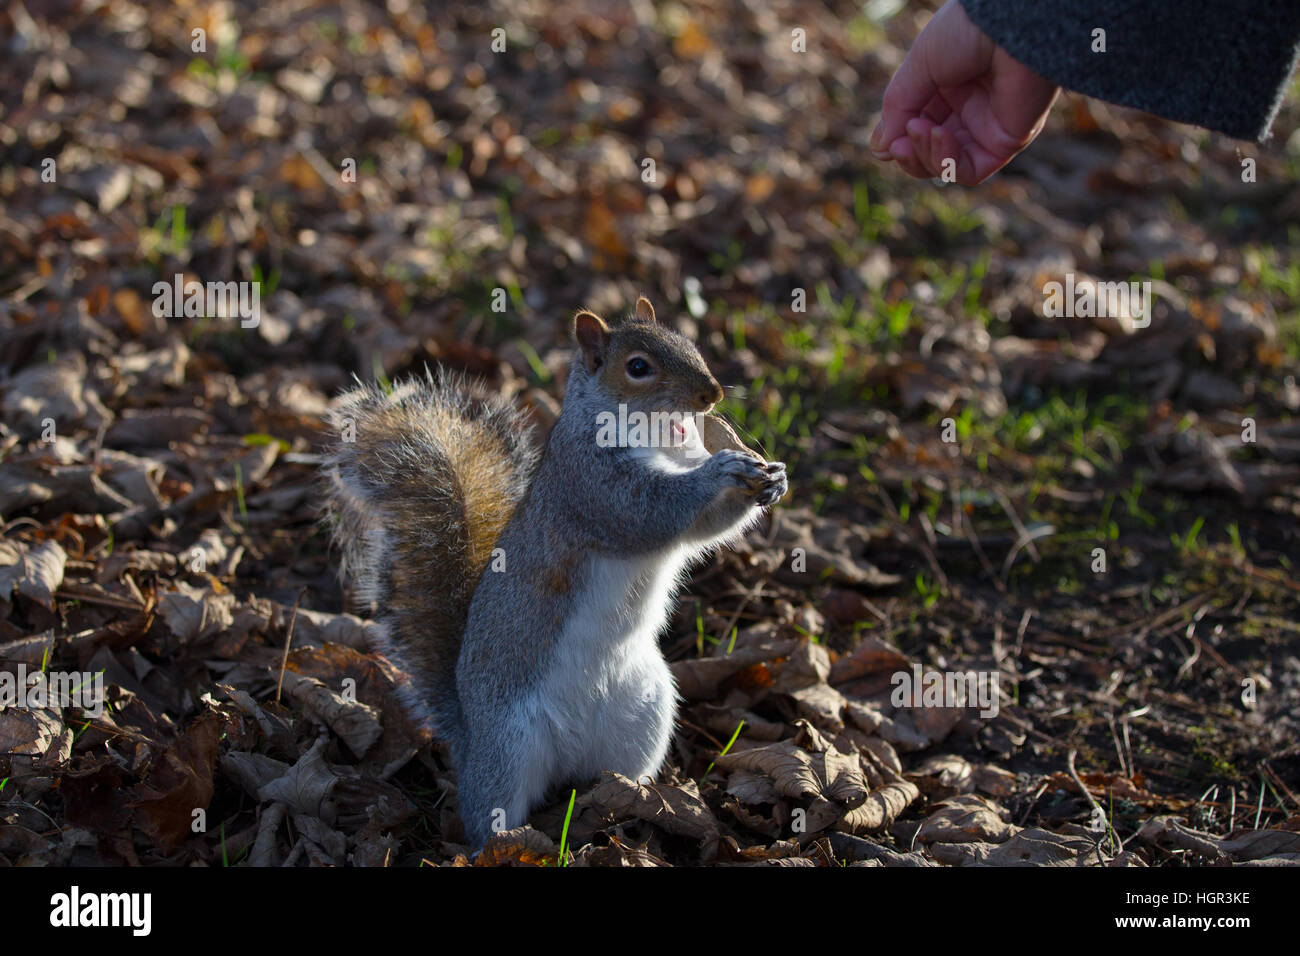 A grey squirrel feeding from a human hand in a park Stock Photo